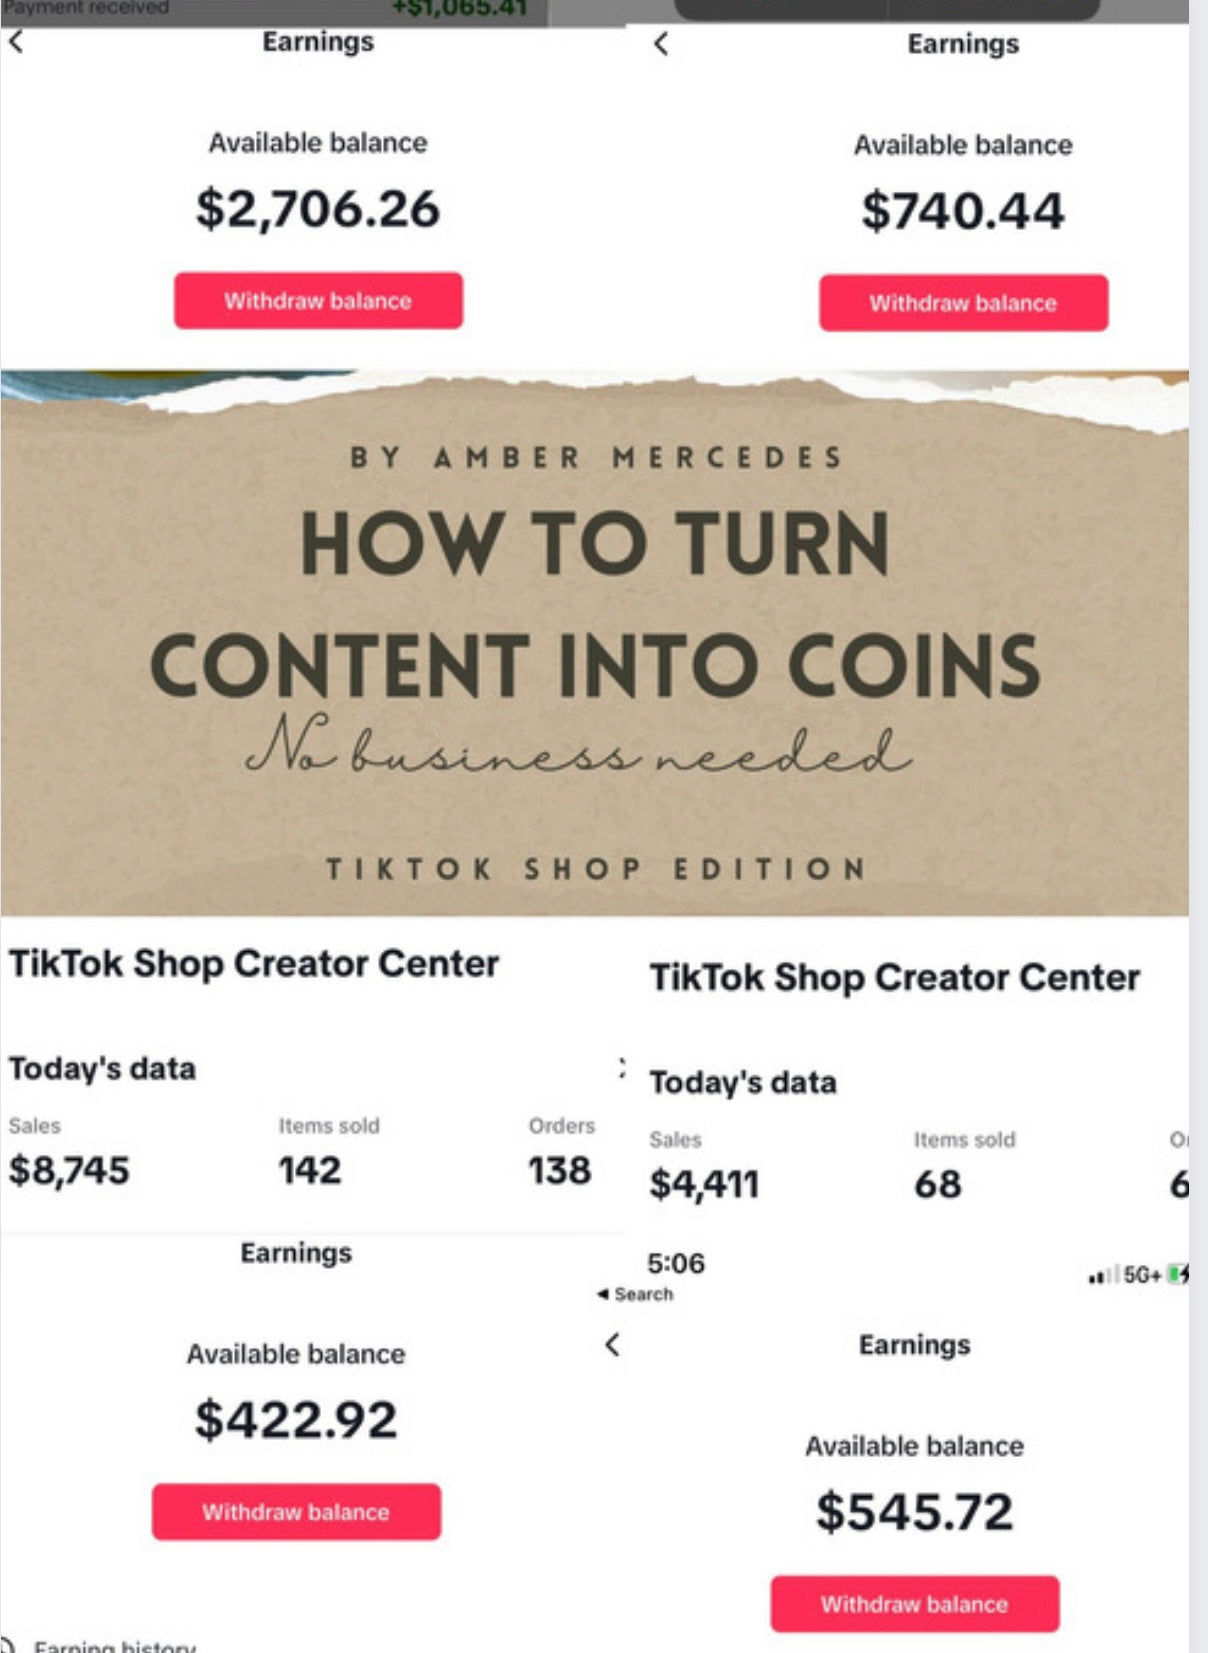 HOW TO TURN CONTENT INTO COINS: TIKTOK SHOP CREATOR